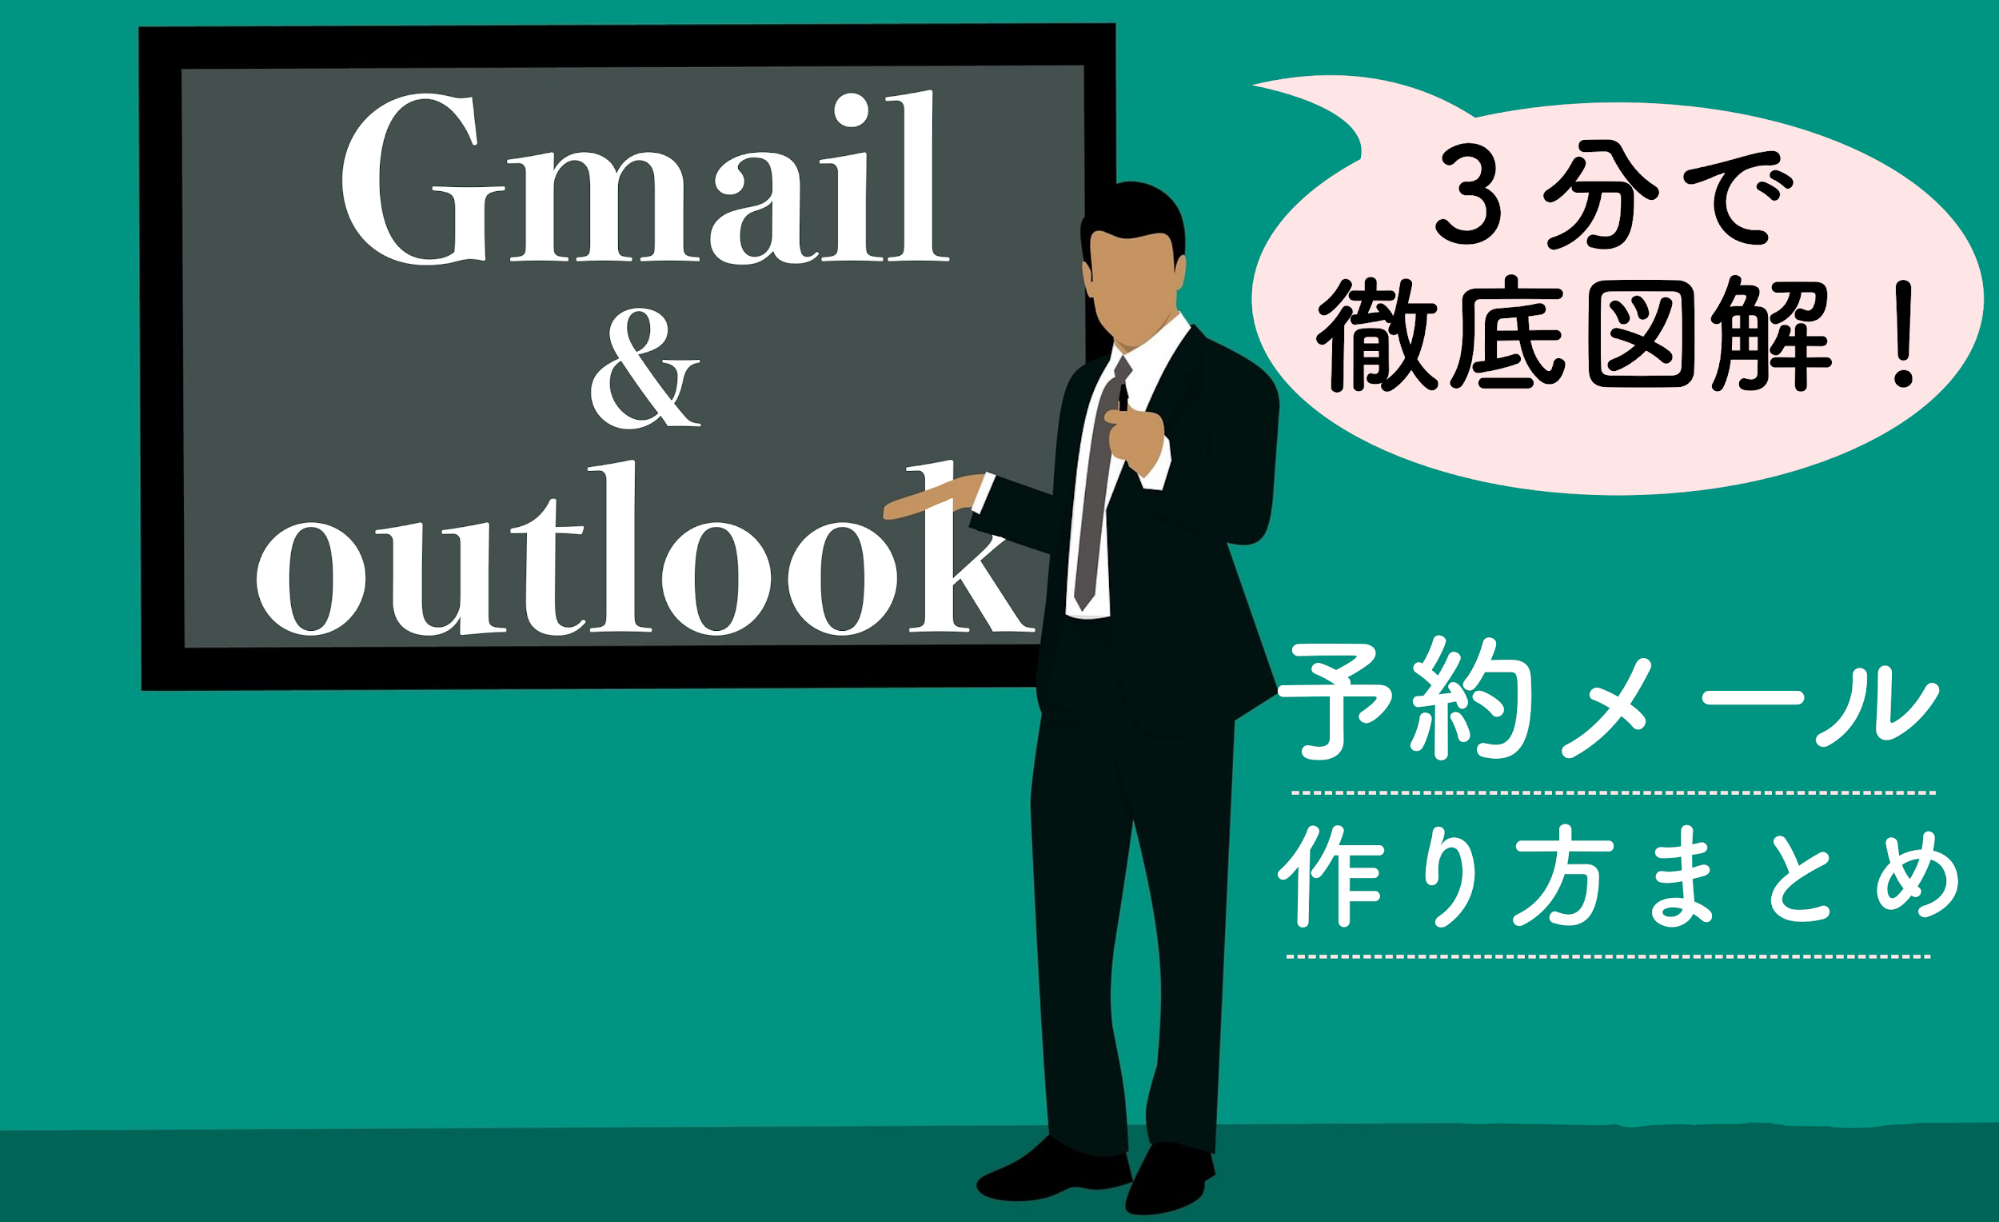 Gmail Outlook 予約メール作成の方法を図解します メール配信システム Blastmail Offical Blog